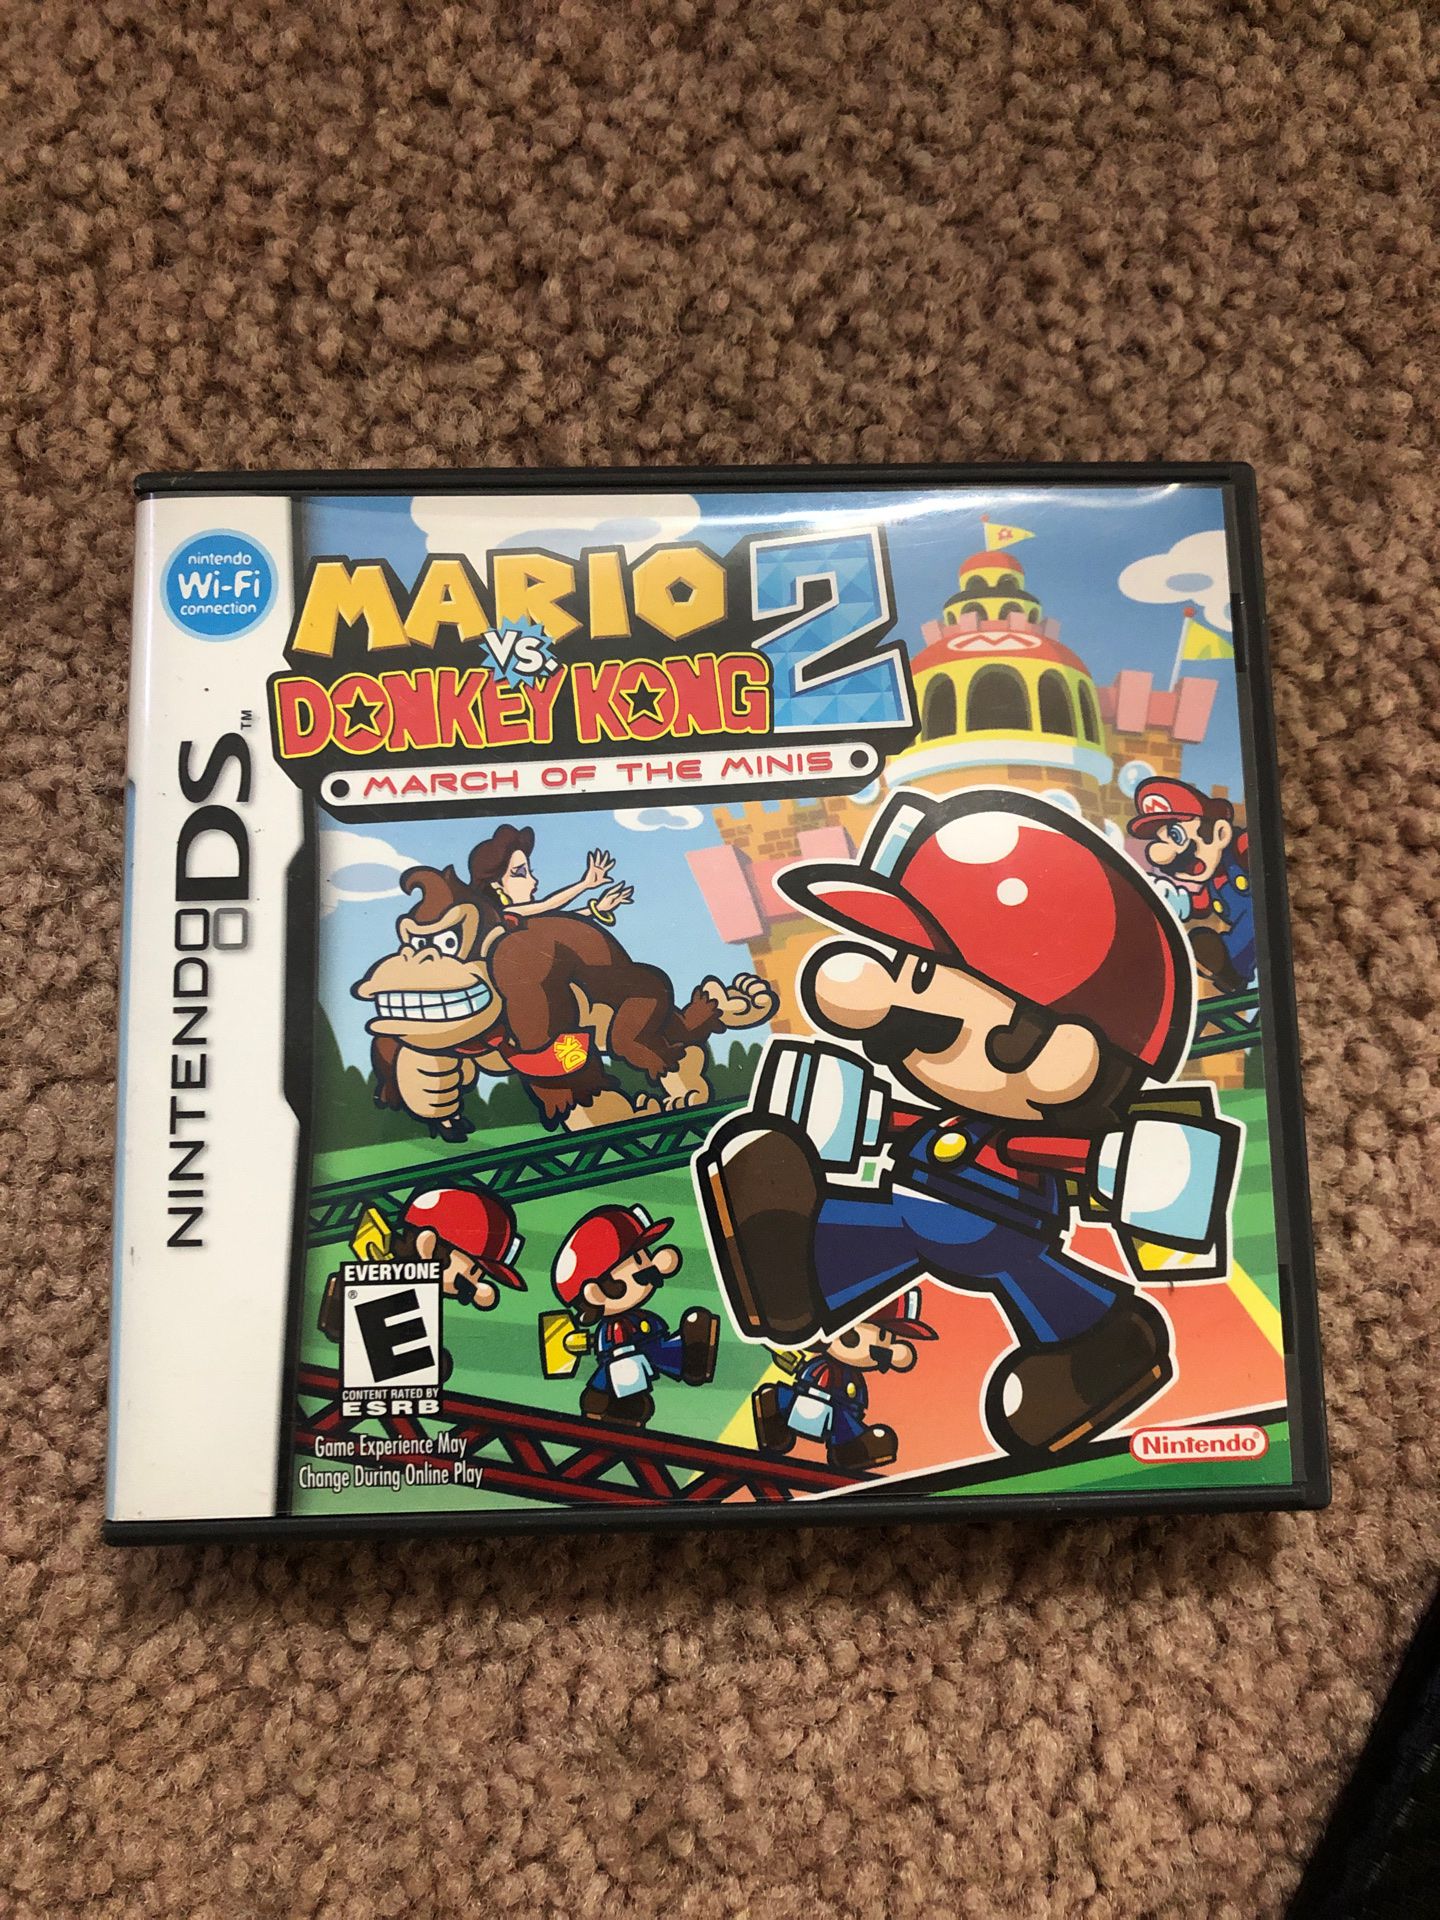 Mario vs Donkey Kong 2: March of the Minis - Nintendo DS